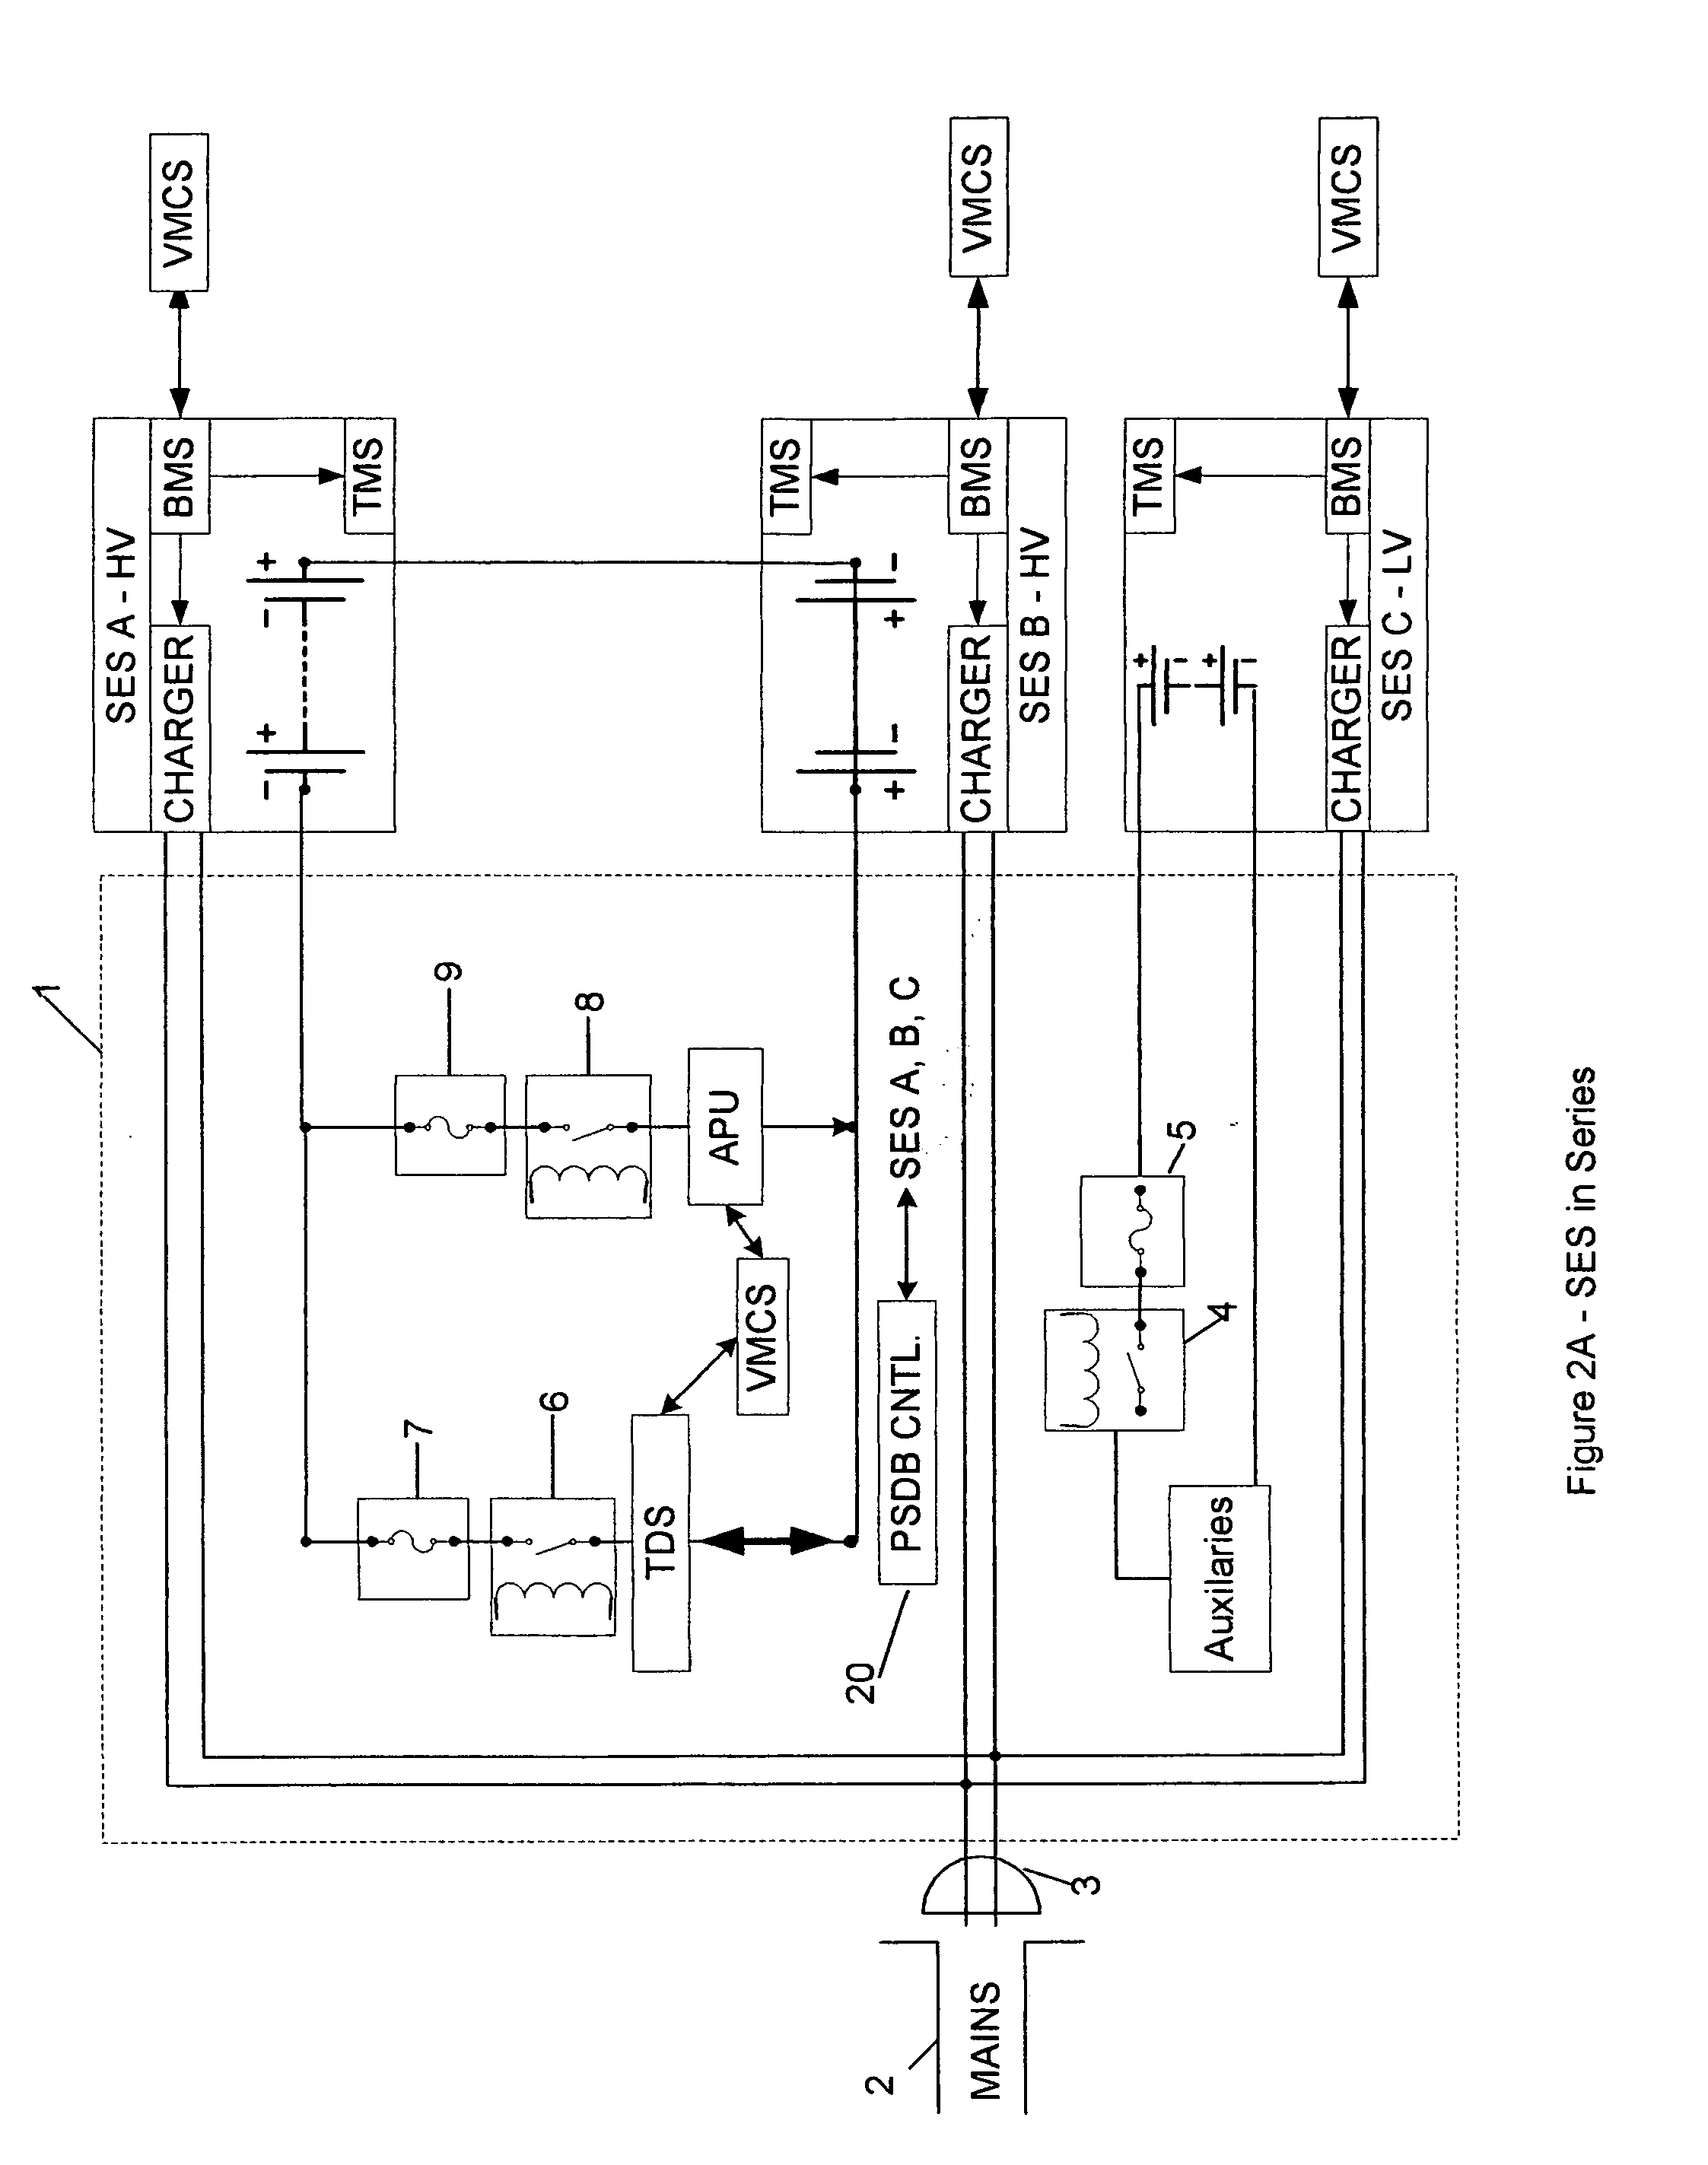 Vehicle charging, monitoring and control systems for electric and hybrid electric vehicles